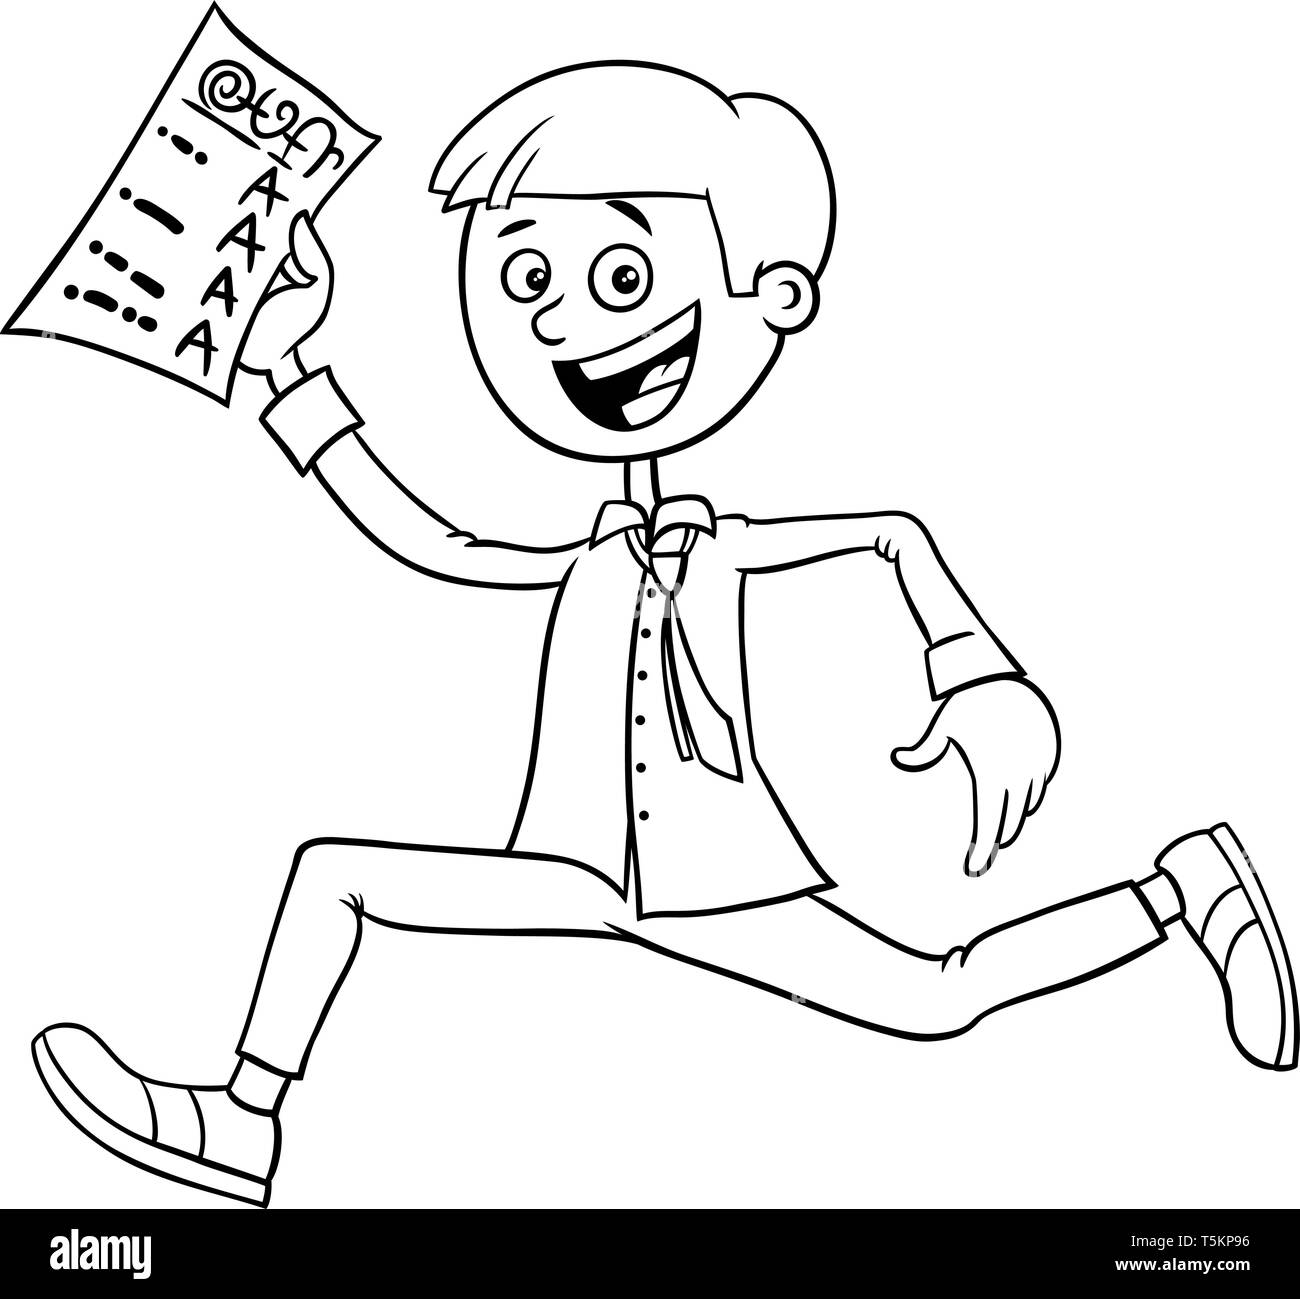 Black and White Cartoon Illustration of Happy Boy with School Certificate or Grade Report Coloring Book Stock Vector